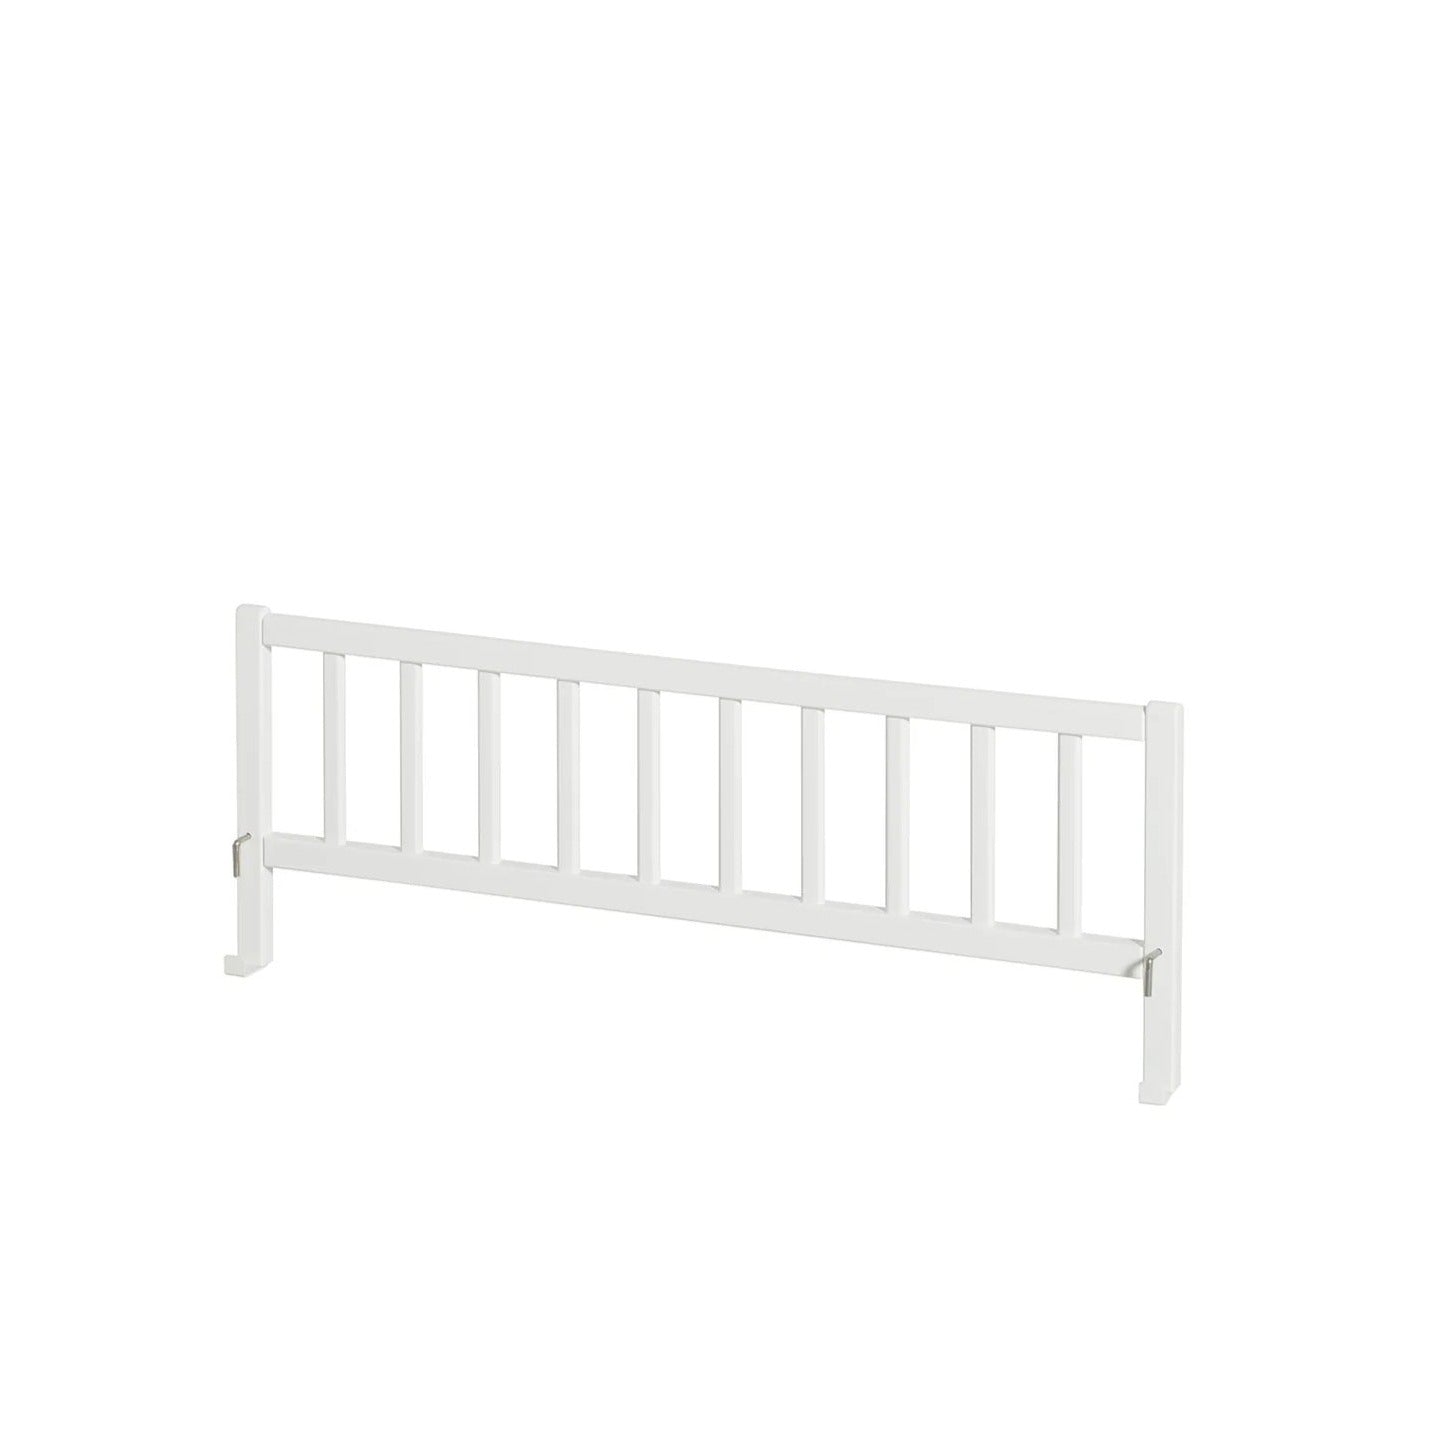 Oliver Furniture Seaside Classic Day Bed